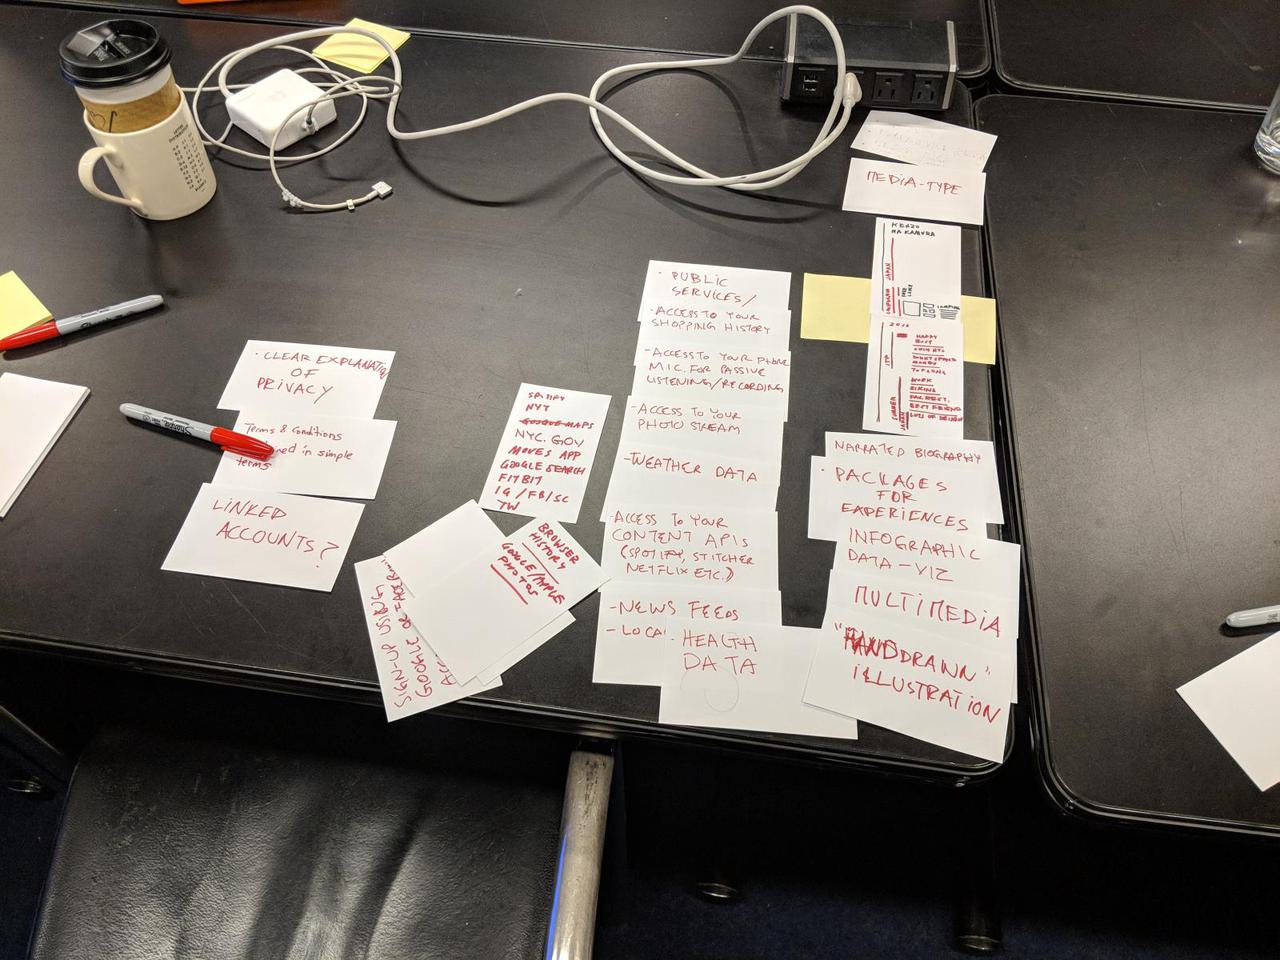 itp desk with small index cards neatly arranged on desk. each card contains a single brainstormed idea for this project.